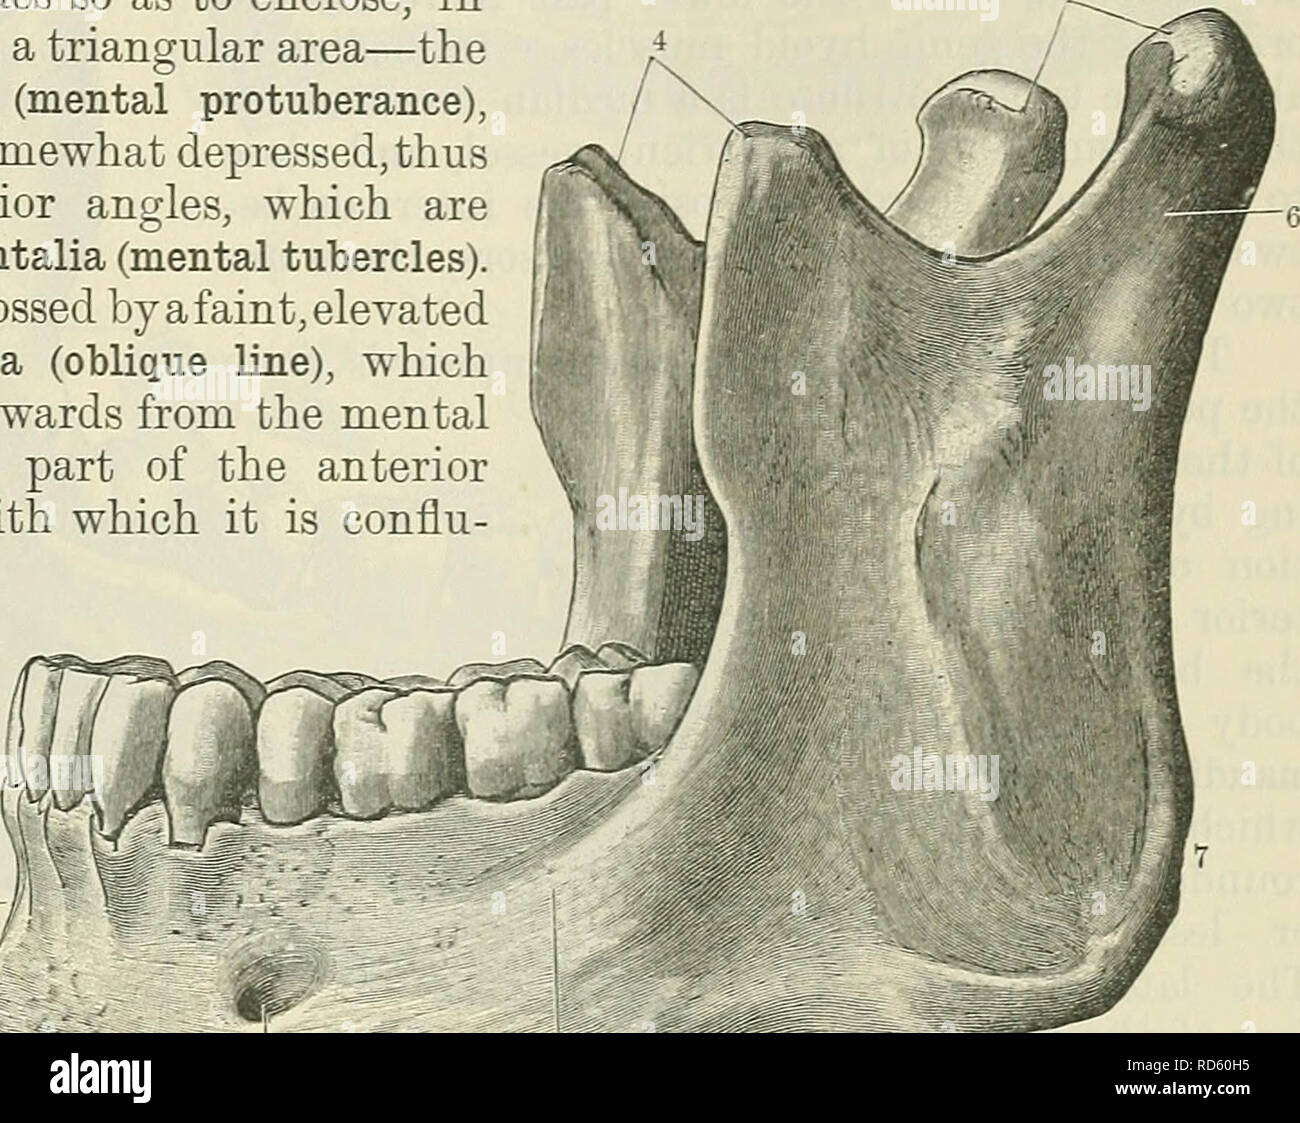 . Cunningham's Text-book of anatomy. Anatomy. temporal bones. The anterior or horizontal part, which contains the teeth, is called the corpus mandibulse (body); the posterior or vertical portions constitute the rami mandibular. The body displays in the median plane, in front, a faint vertical ridge, the symphysis, which indicates the line of fusion of the two symmetrical halves from which the bone is primarily developed. In- feriorly this ridge divides so as to enclose, in well-marked specimens, a triangular area—the protuberantia mentalis (mental protuberance), the centre of which is somewhat Stock Photo